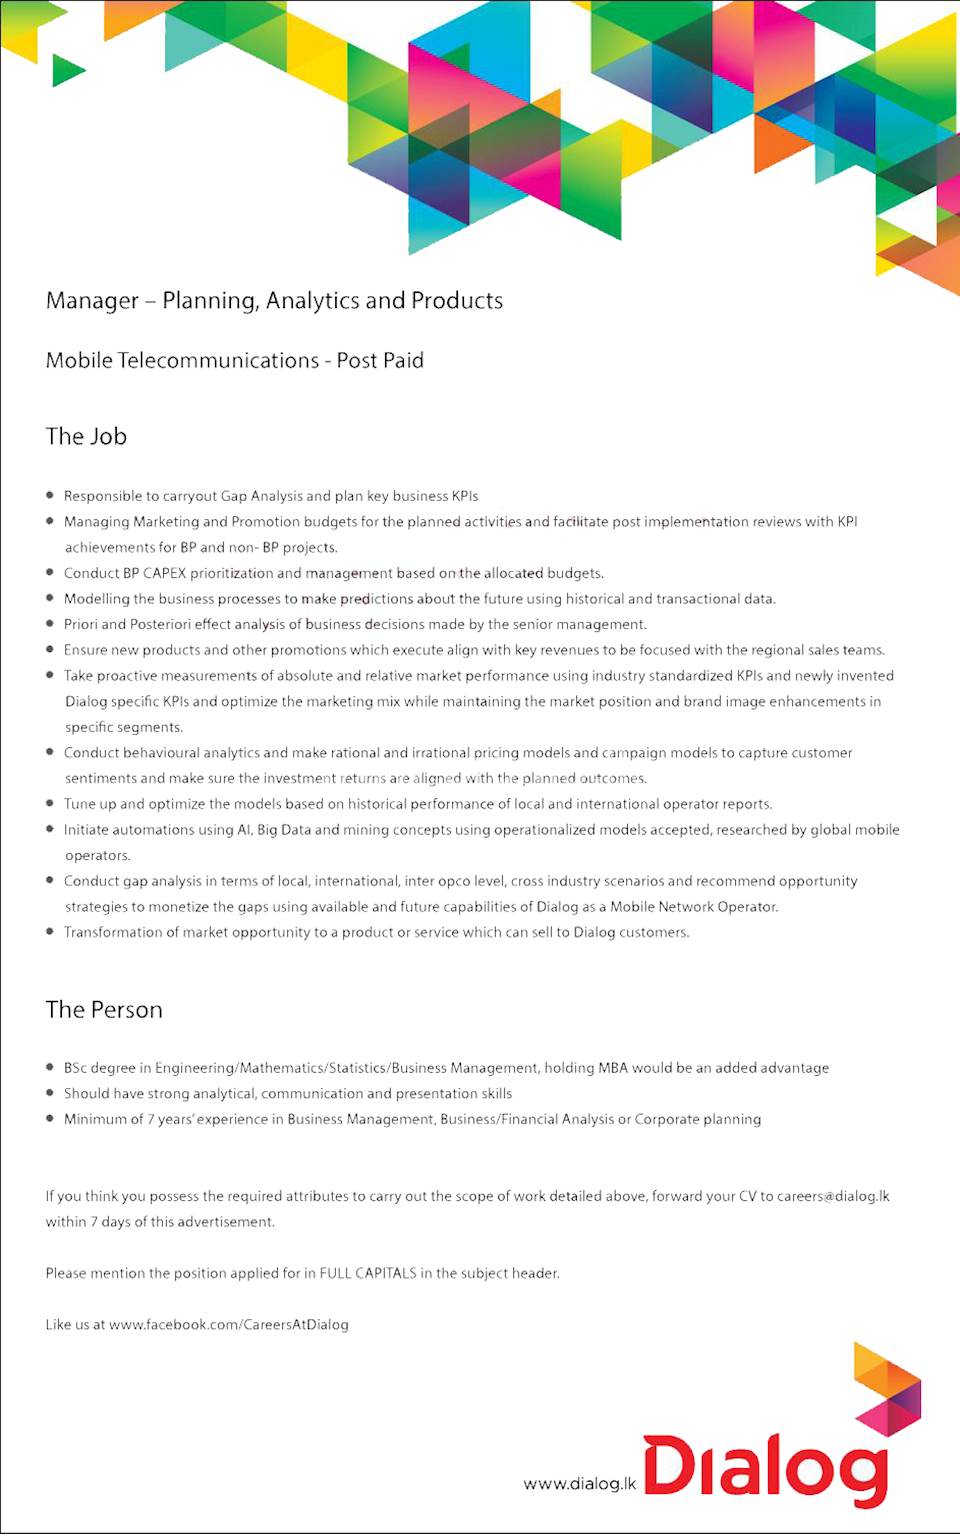 Manager - Planning , Analytics and Products